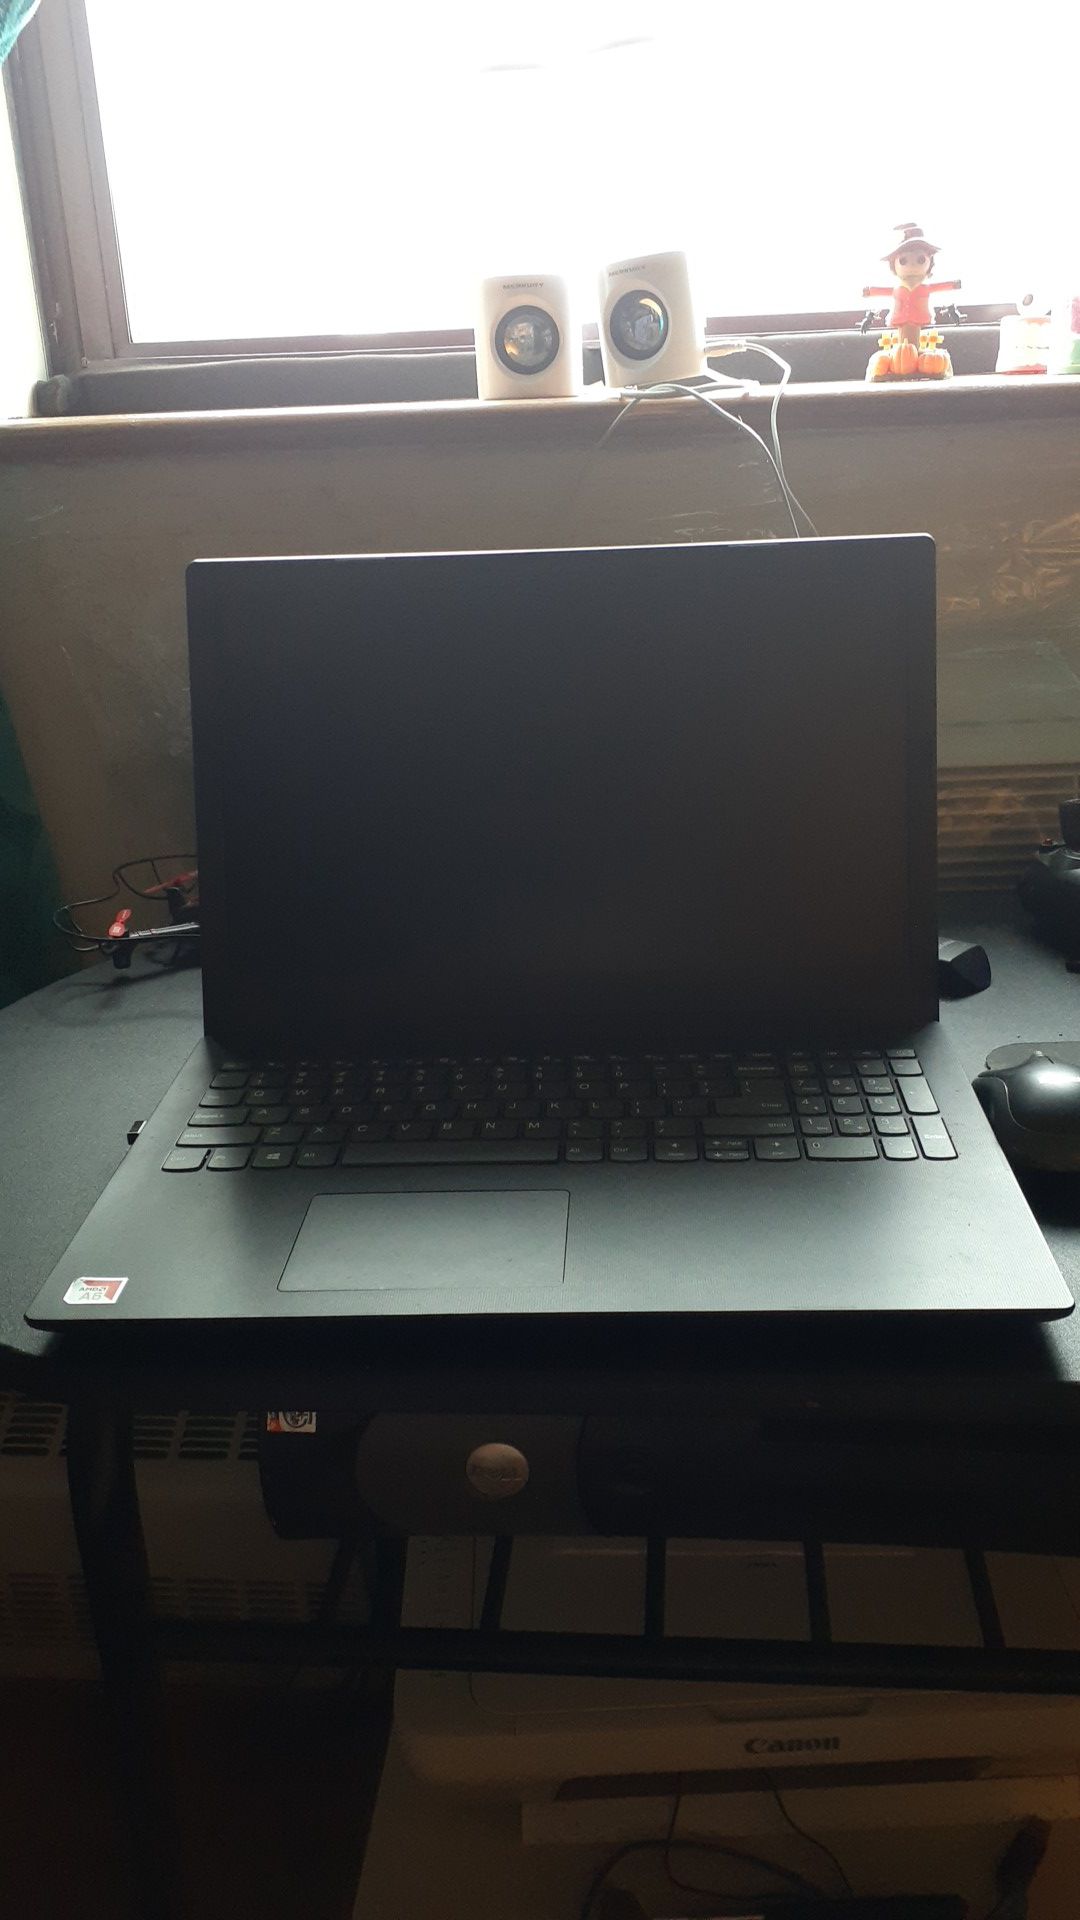 Lenovo laptop a 500 gig hard driveCD ROM drive. Windows 10 operating system. And charger